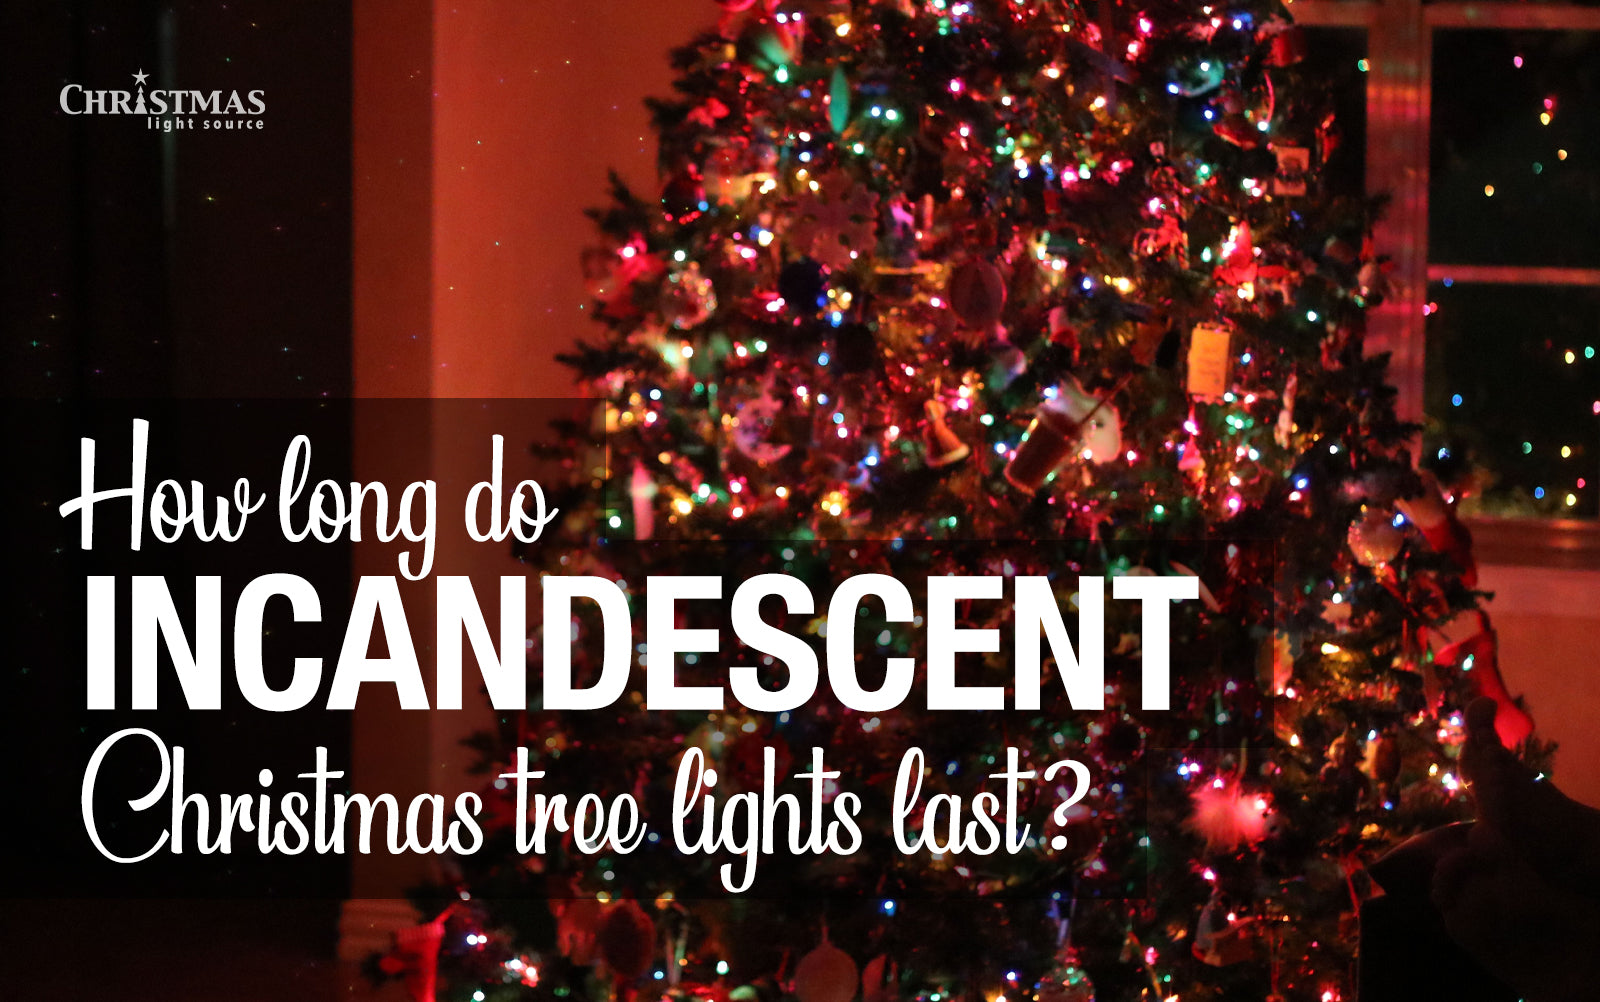 How long do incandescent Christmas tree lights last